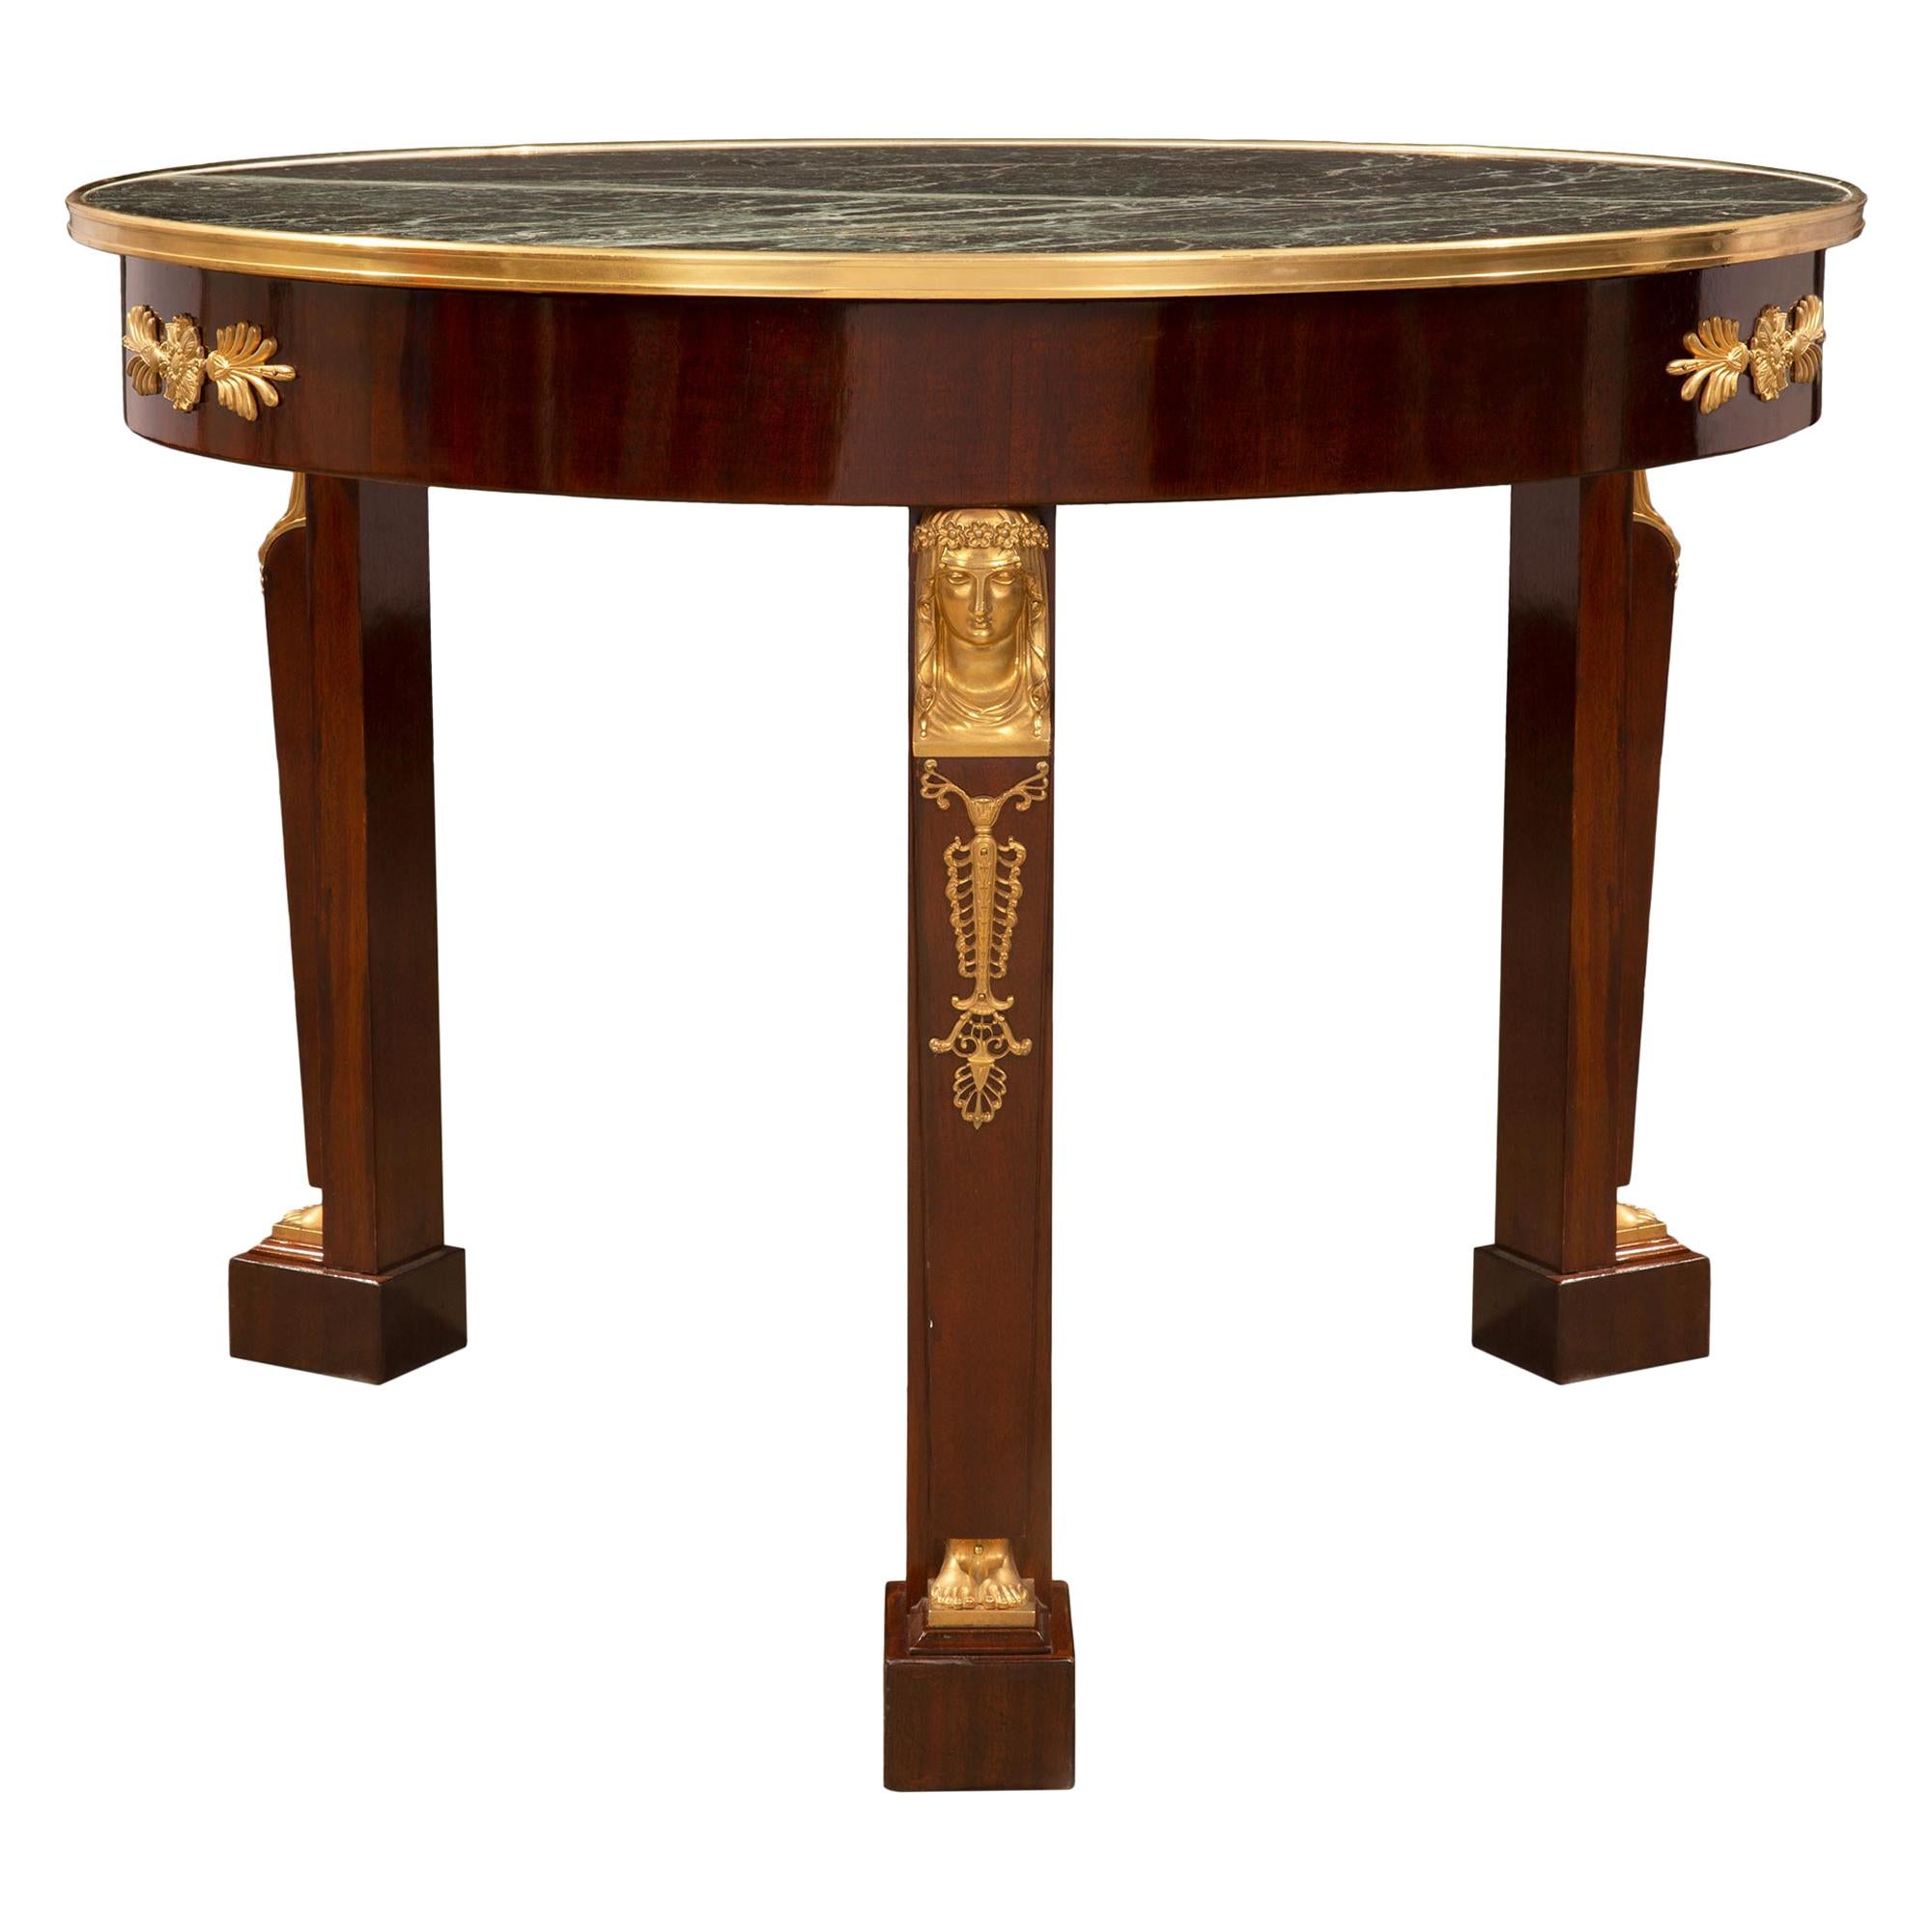 French Mid-19th Century Empire Style Mahogany and Marble Center Table